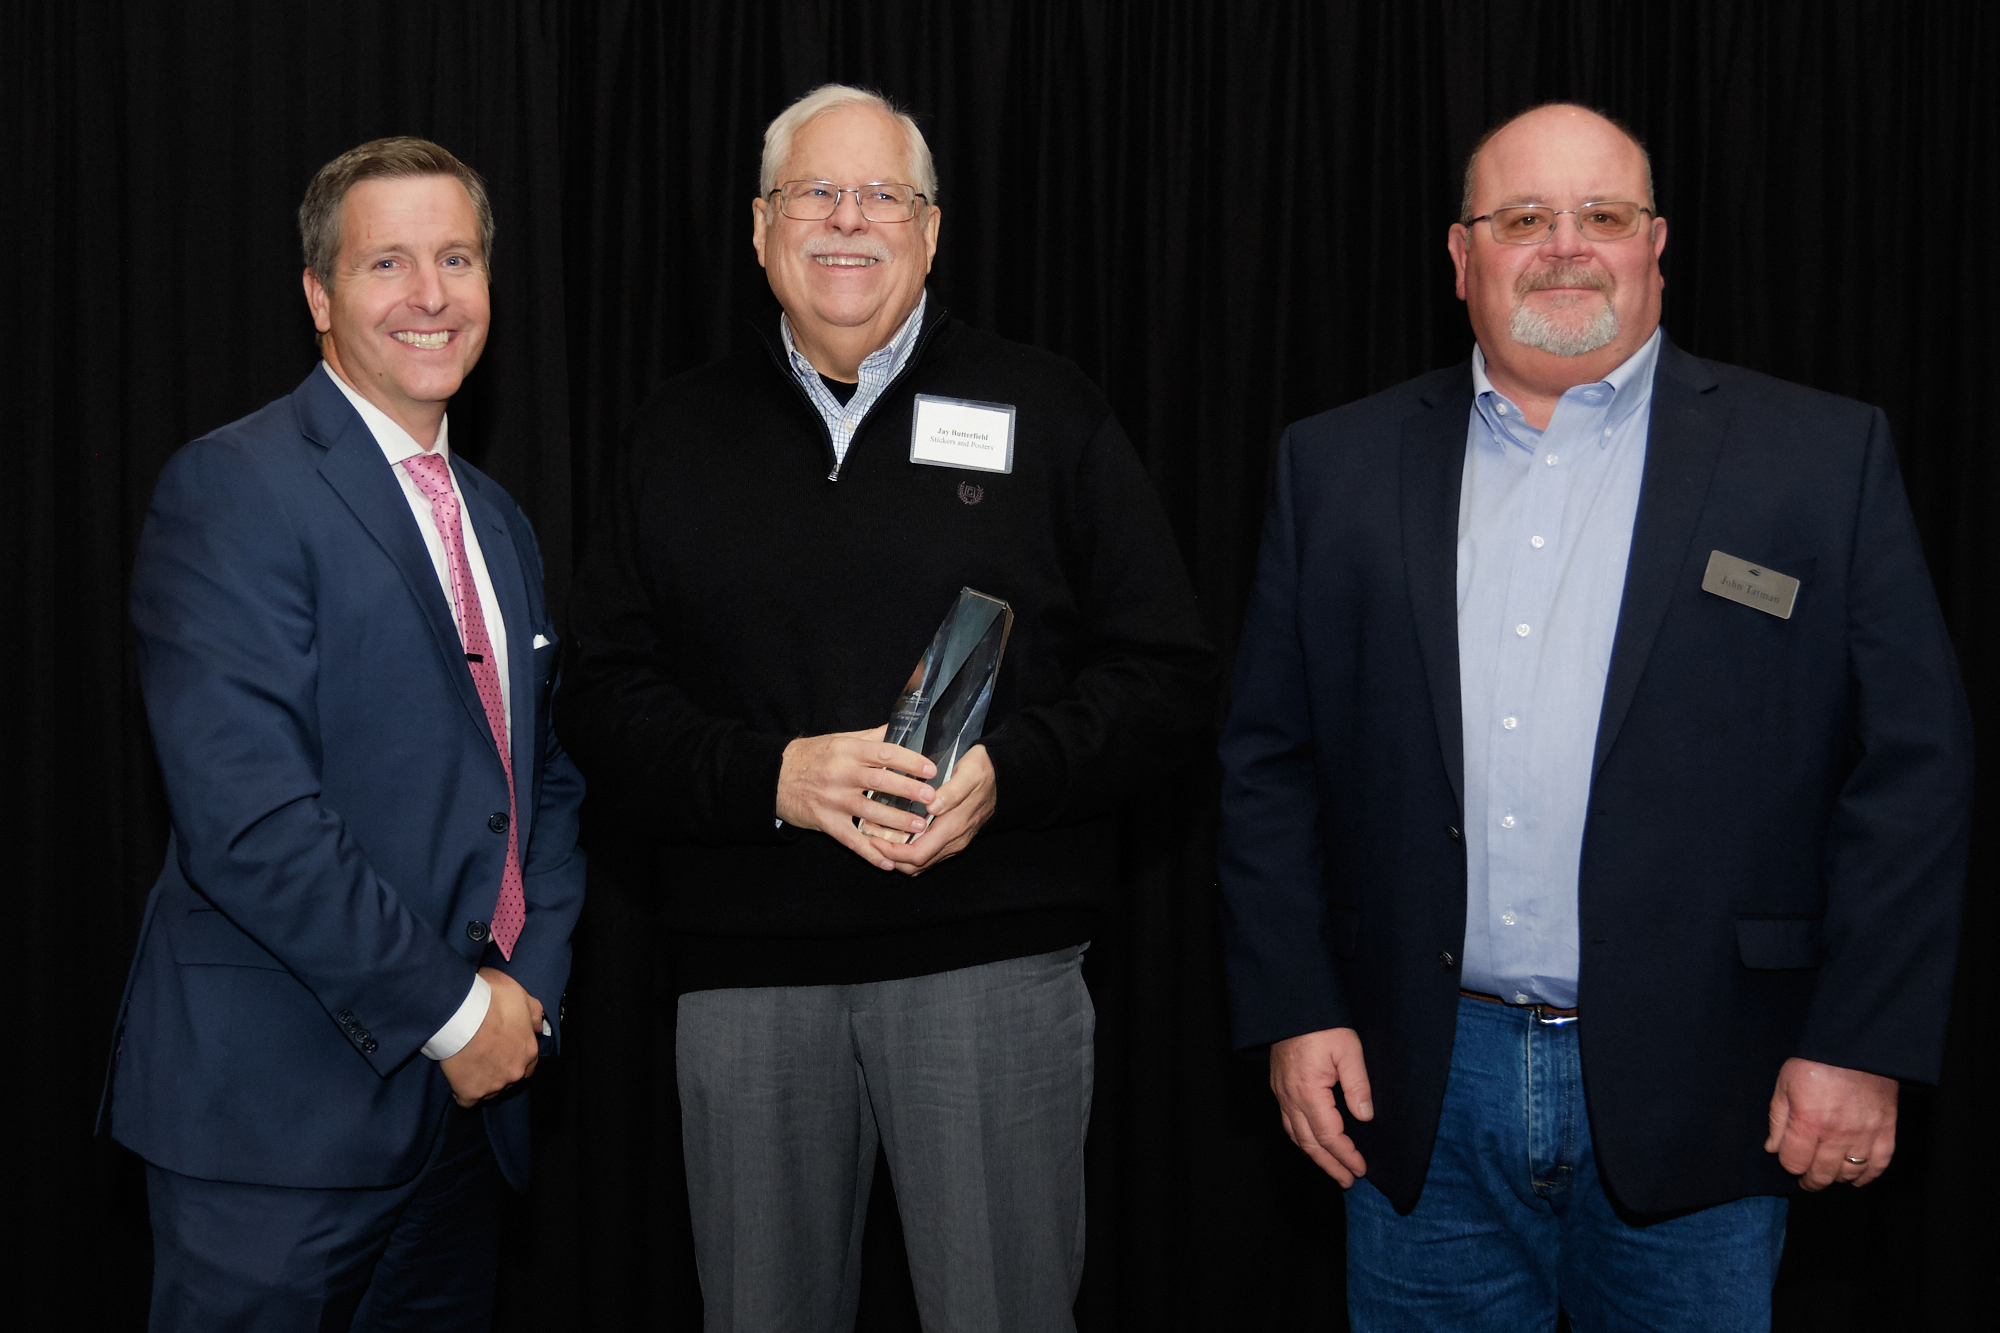 L to R: Corridor CEO Kiley Miller, 2019 Entrepreneur of the Year Jay Butterfield (Stickers and Posters), Corridor Board Chair John Tatman